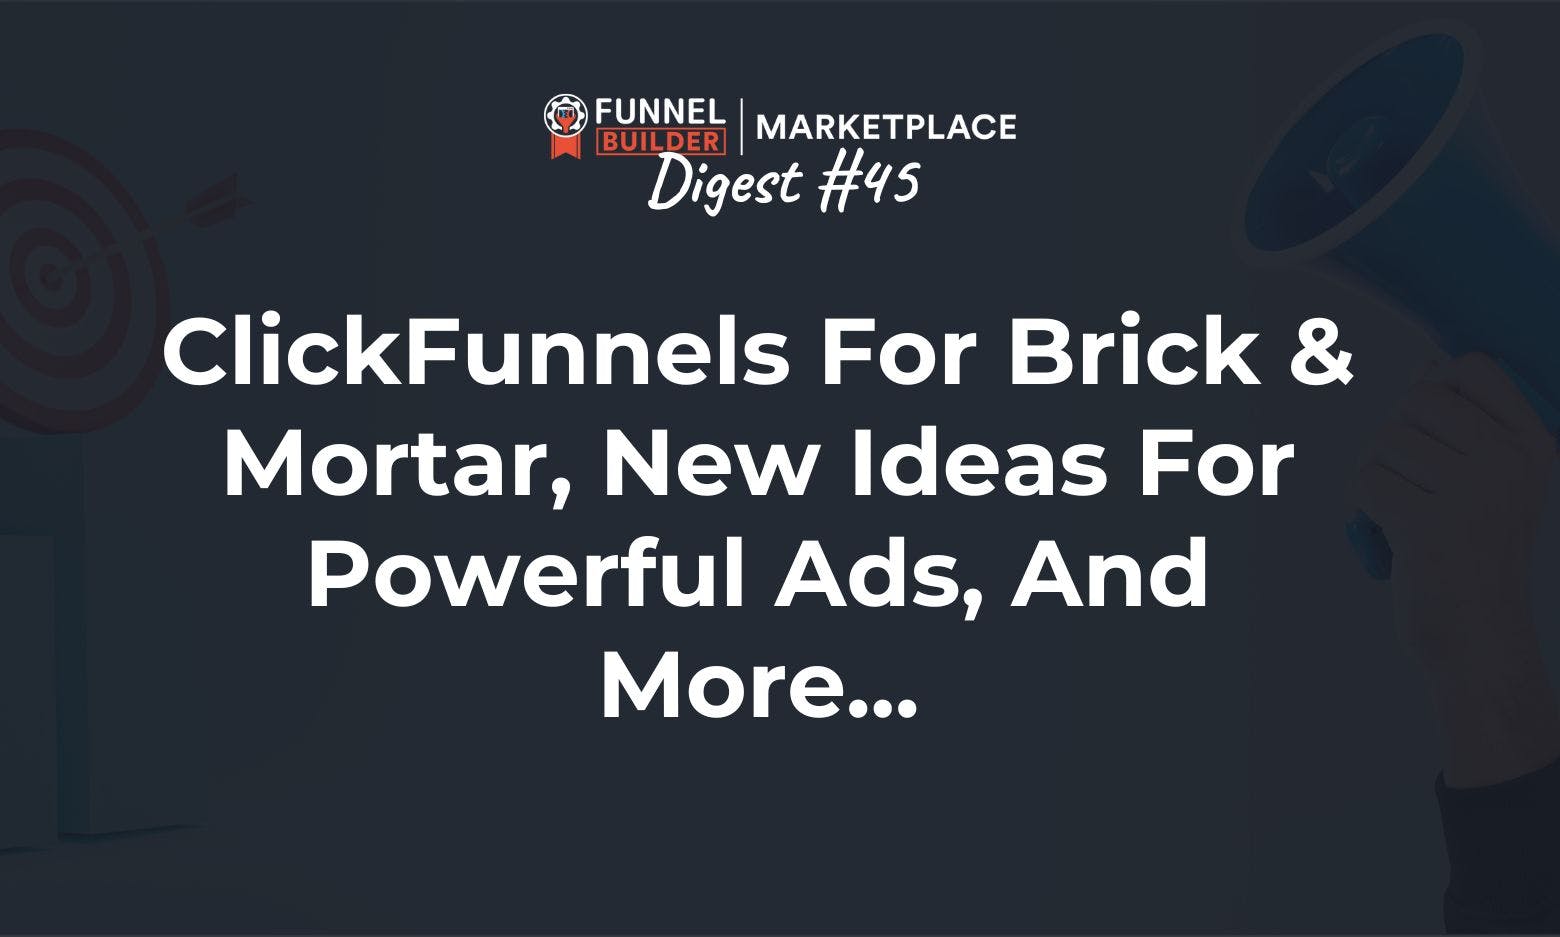 FBM Digest #45: ClickFunnels for brick and mortar, new ideas for powerful ads, and more...